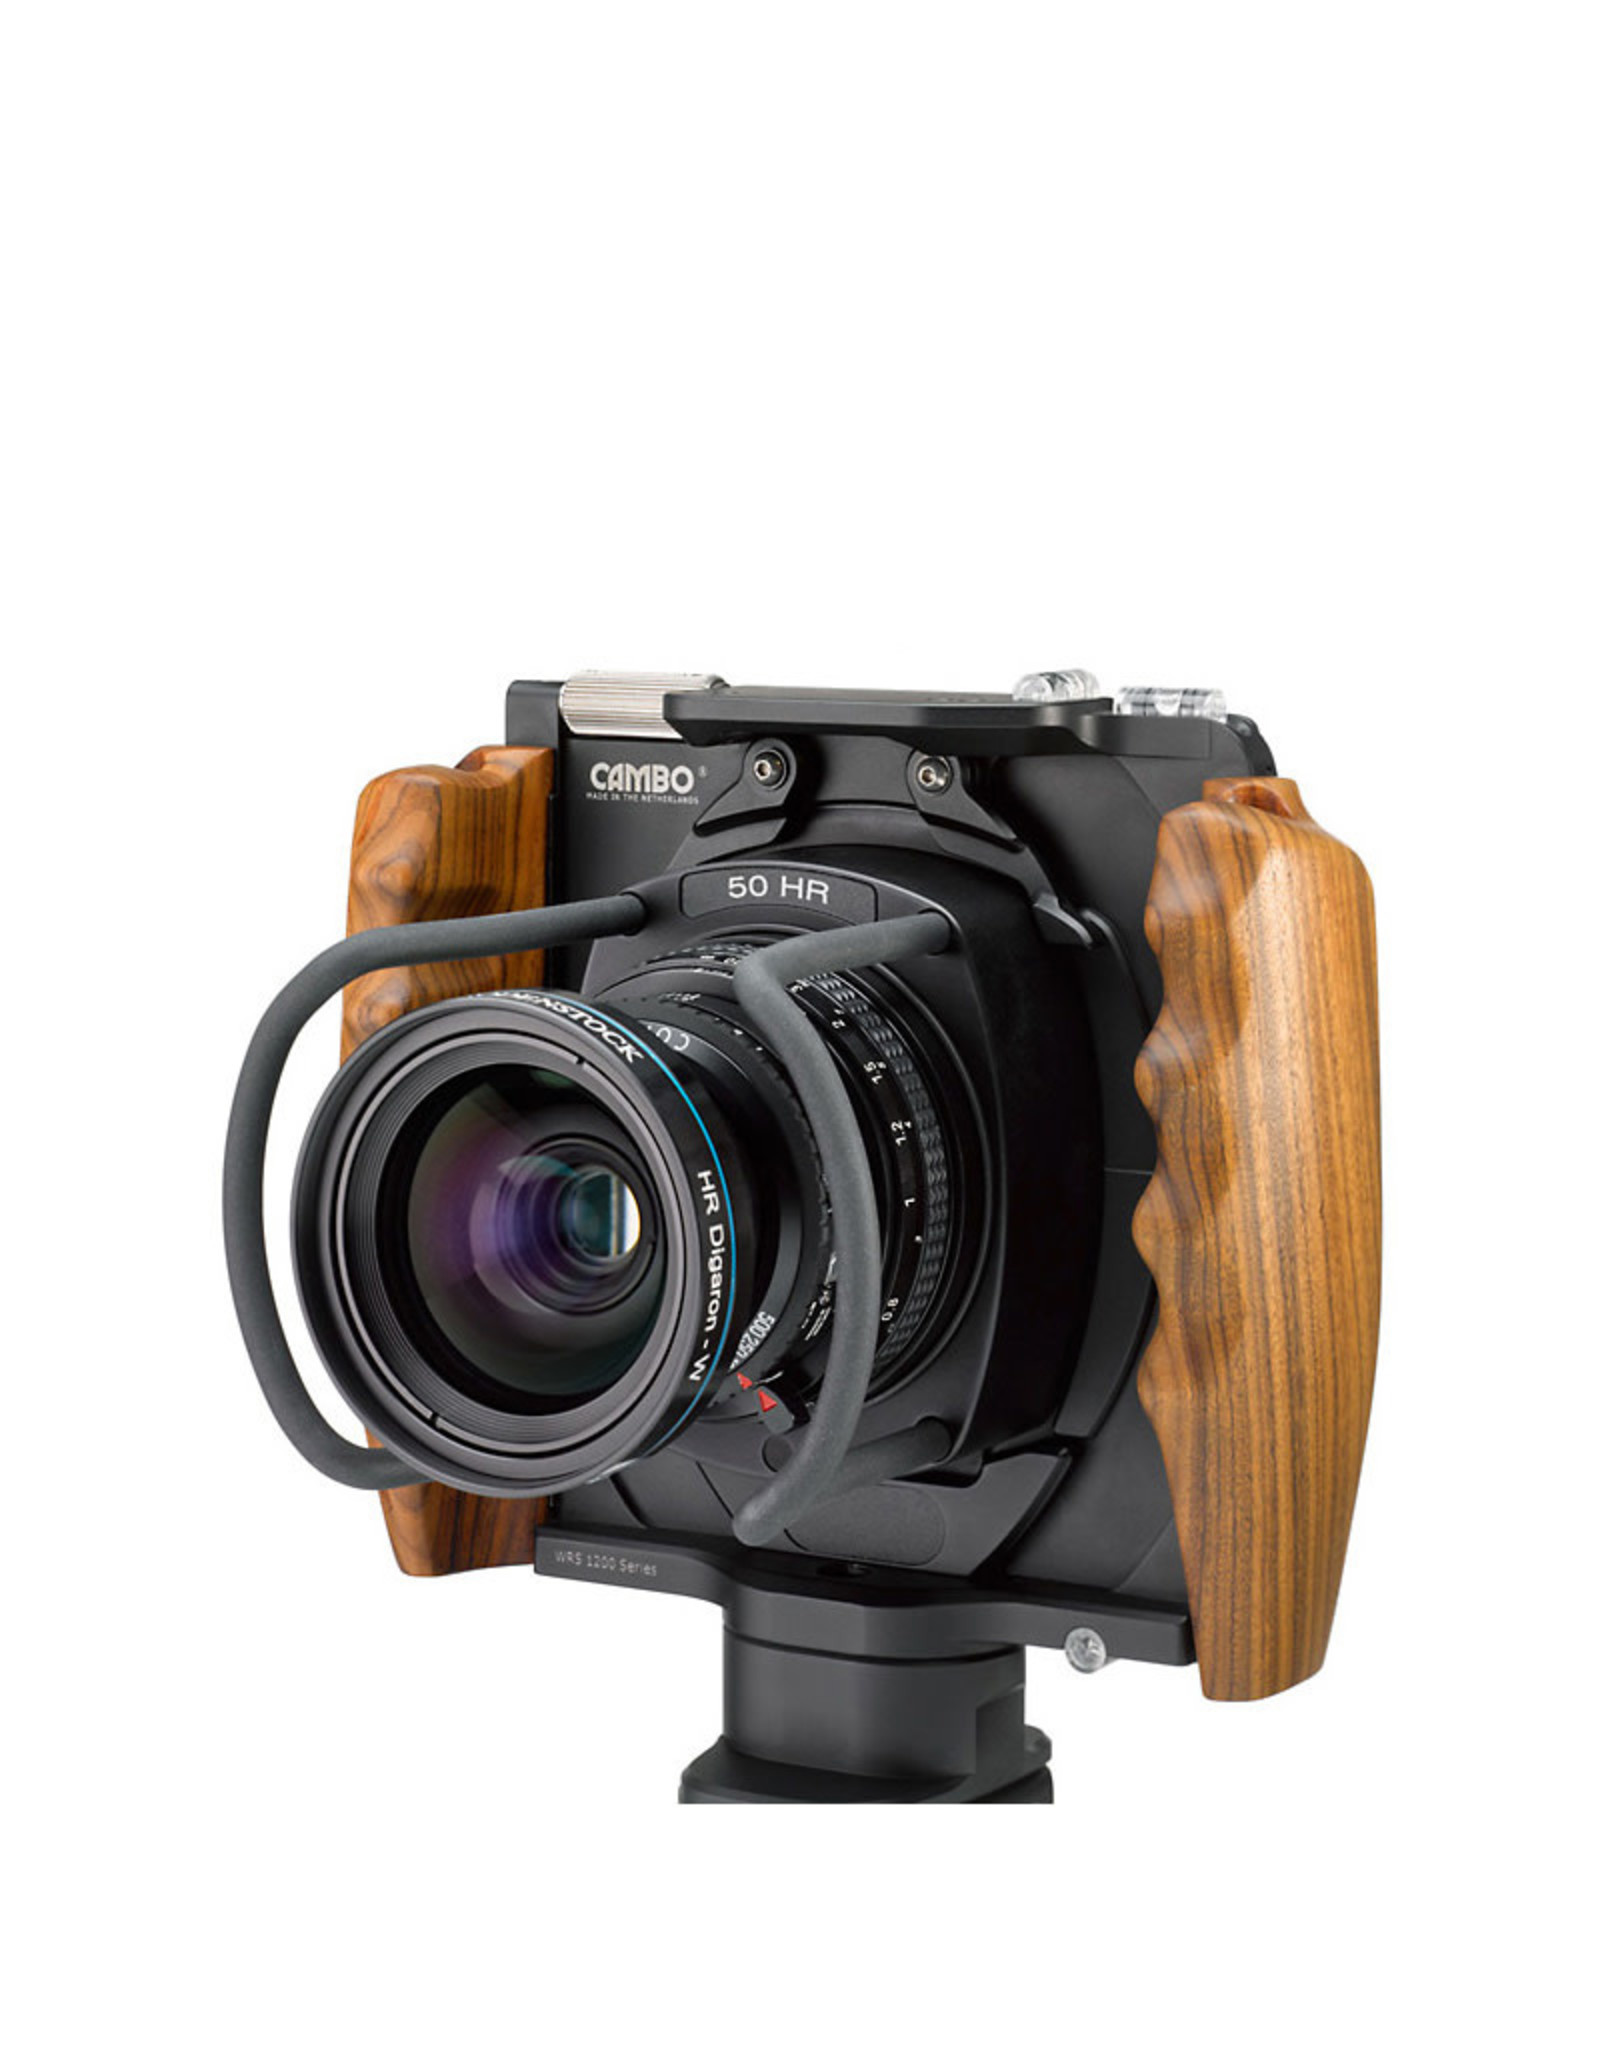 Cambo Cambo WRS-1250 WRS Camera Body with Wooden Handgrips Body package includes softcase, 2 palissander handgrips, cable release, 5 spirit levels, Arca mounting base and LED light